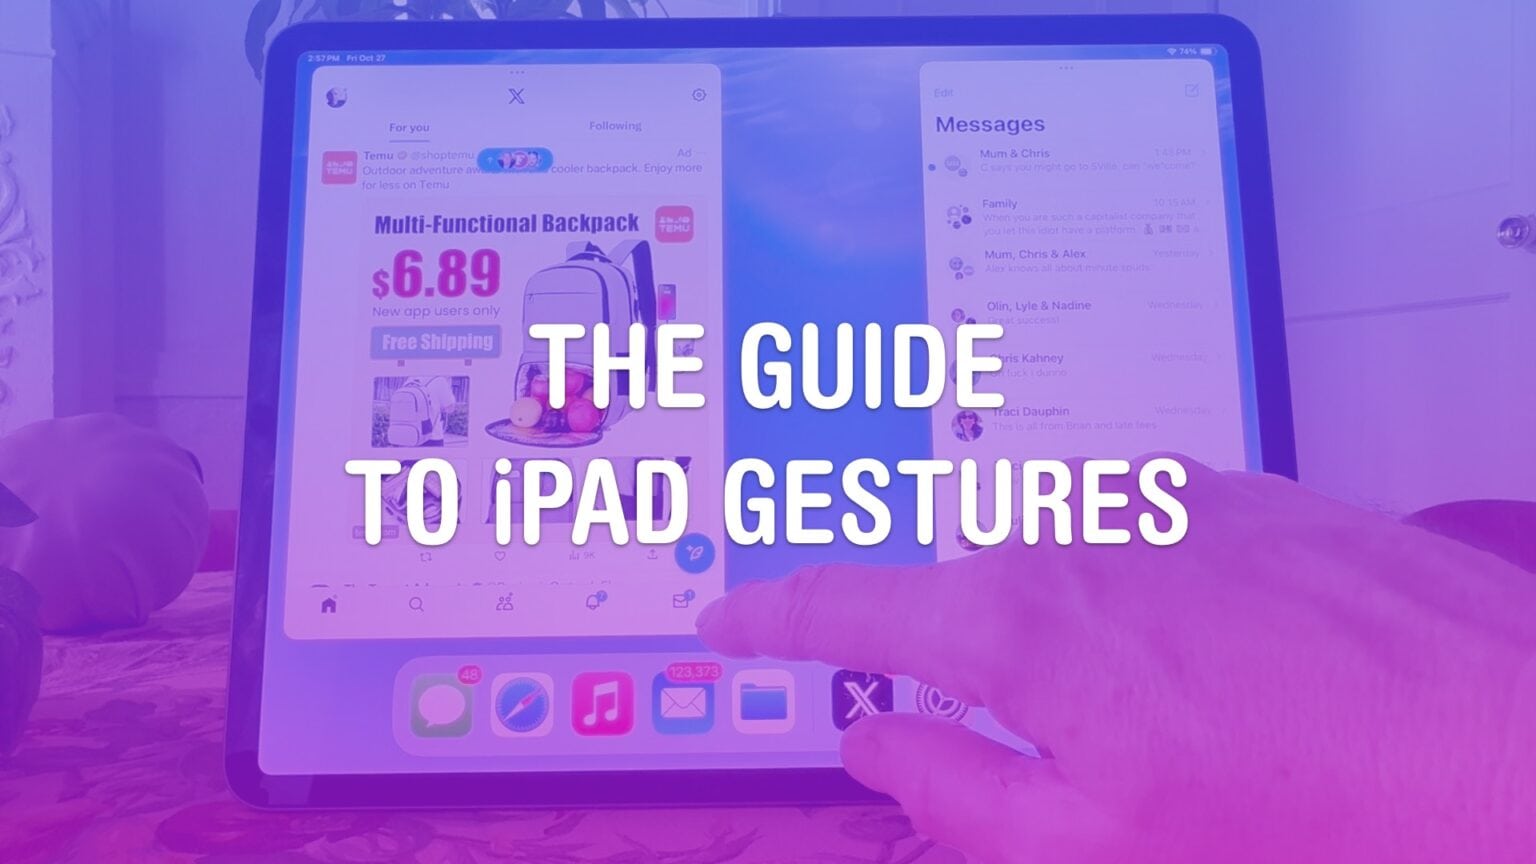 The Guide to iPad Gestures